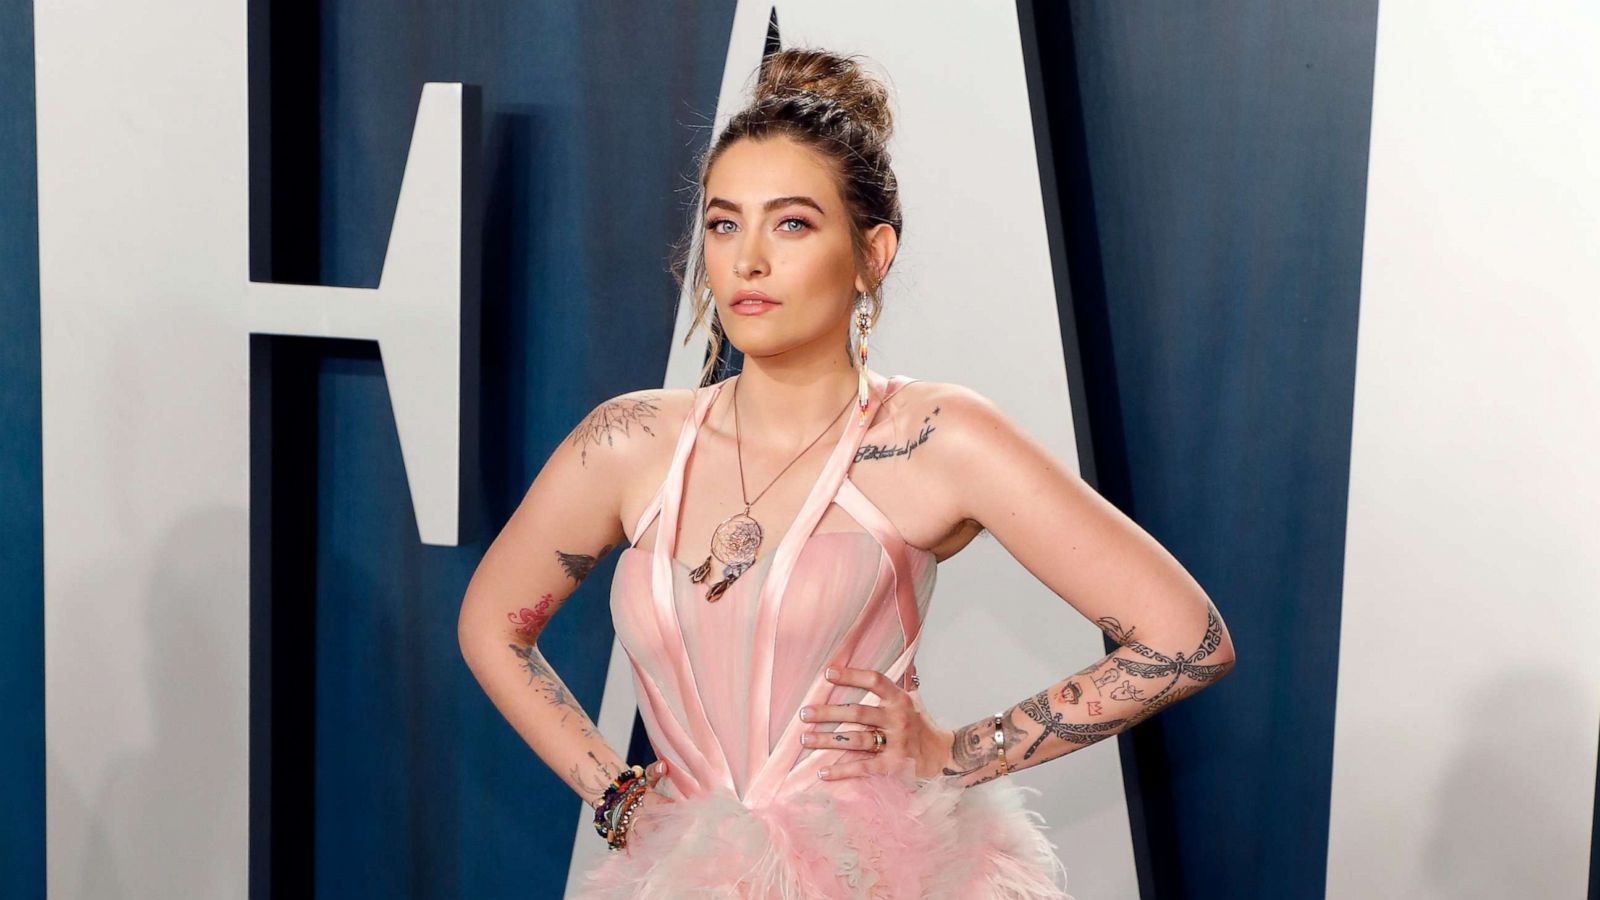 PHOTO: Paris Jackson attends the Vanity Fair Oscar Party at Wallis Annenberg Center for the Performing Arts on Feb. 9, 2020 in Beverly Hills, California.